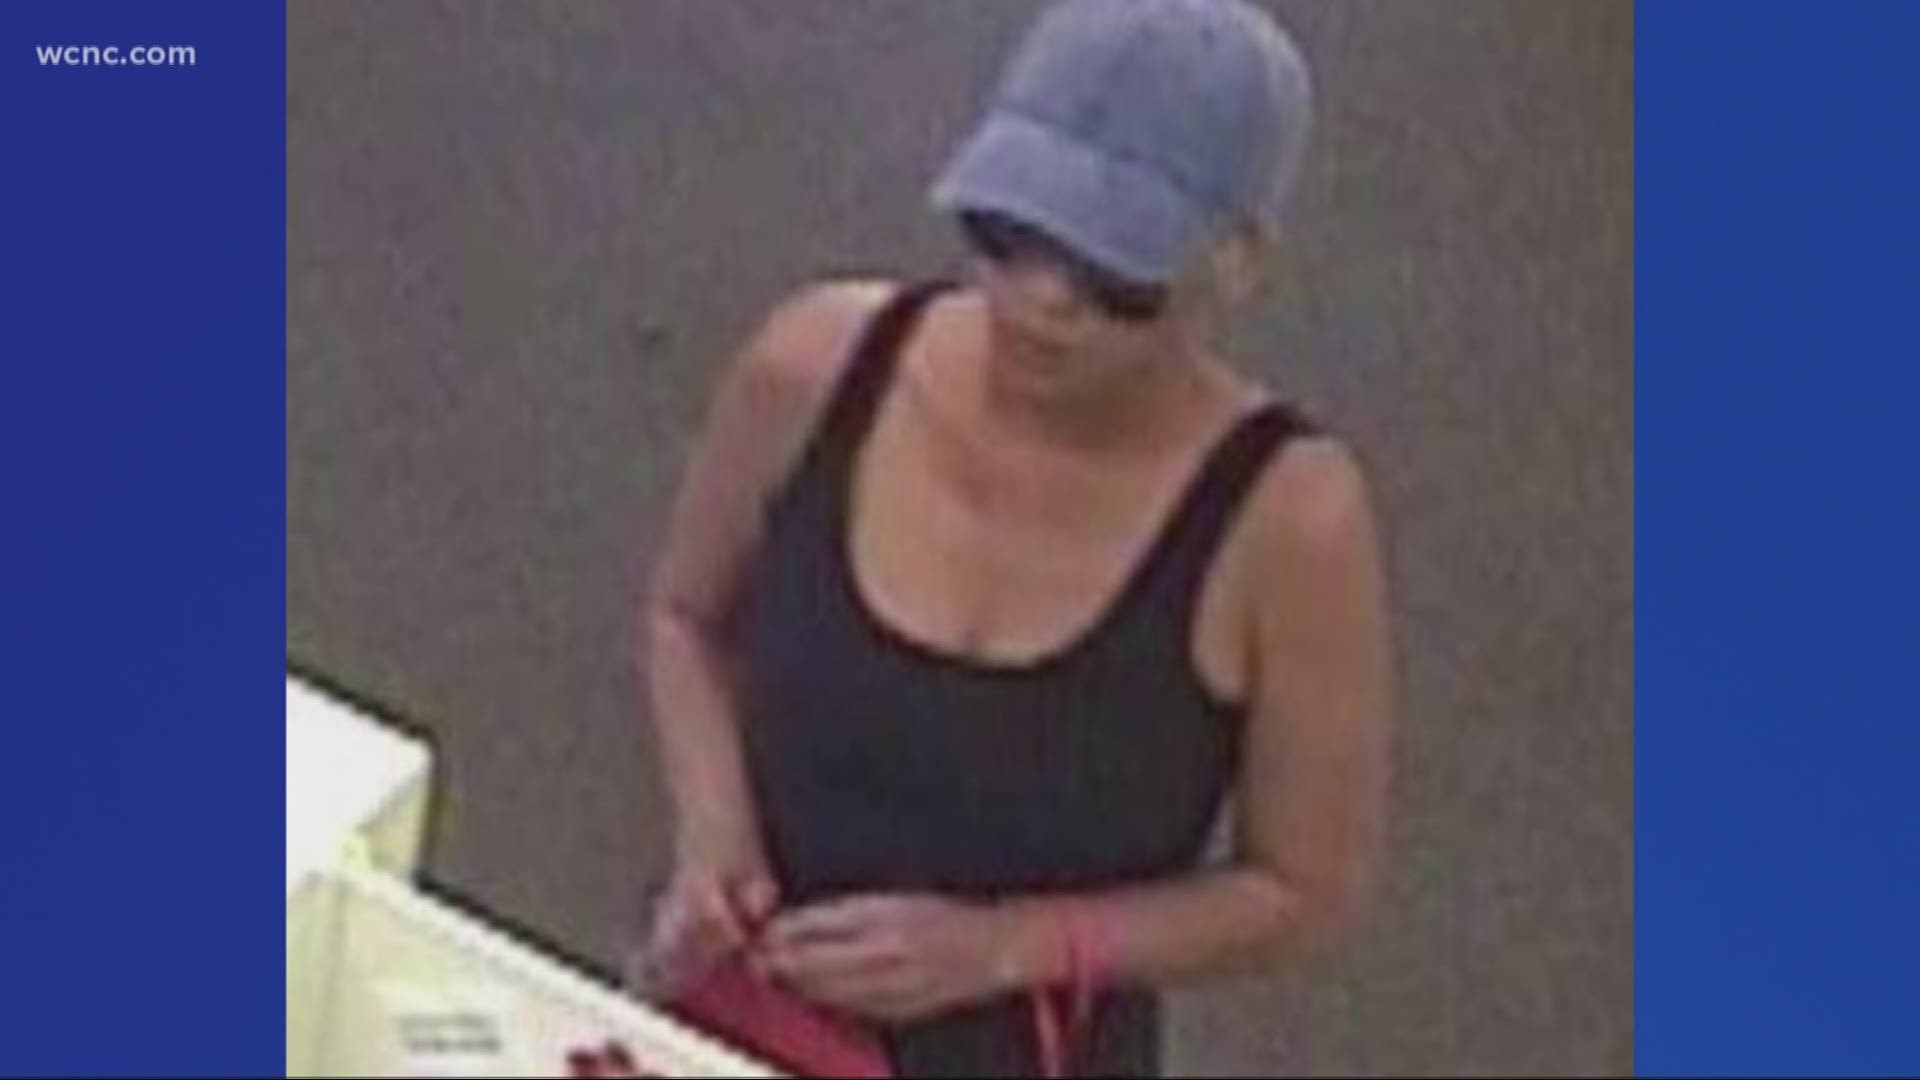 The FBI said this woman has robbed banks in Pennsylvania, Delaware, and North Carolina since July 20.